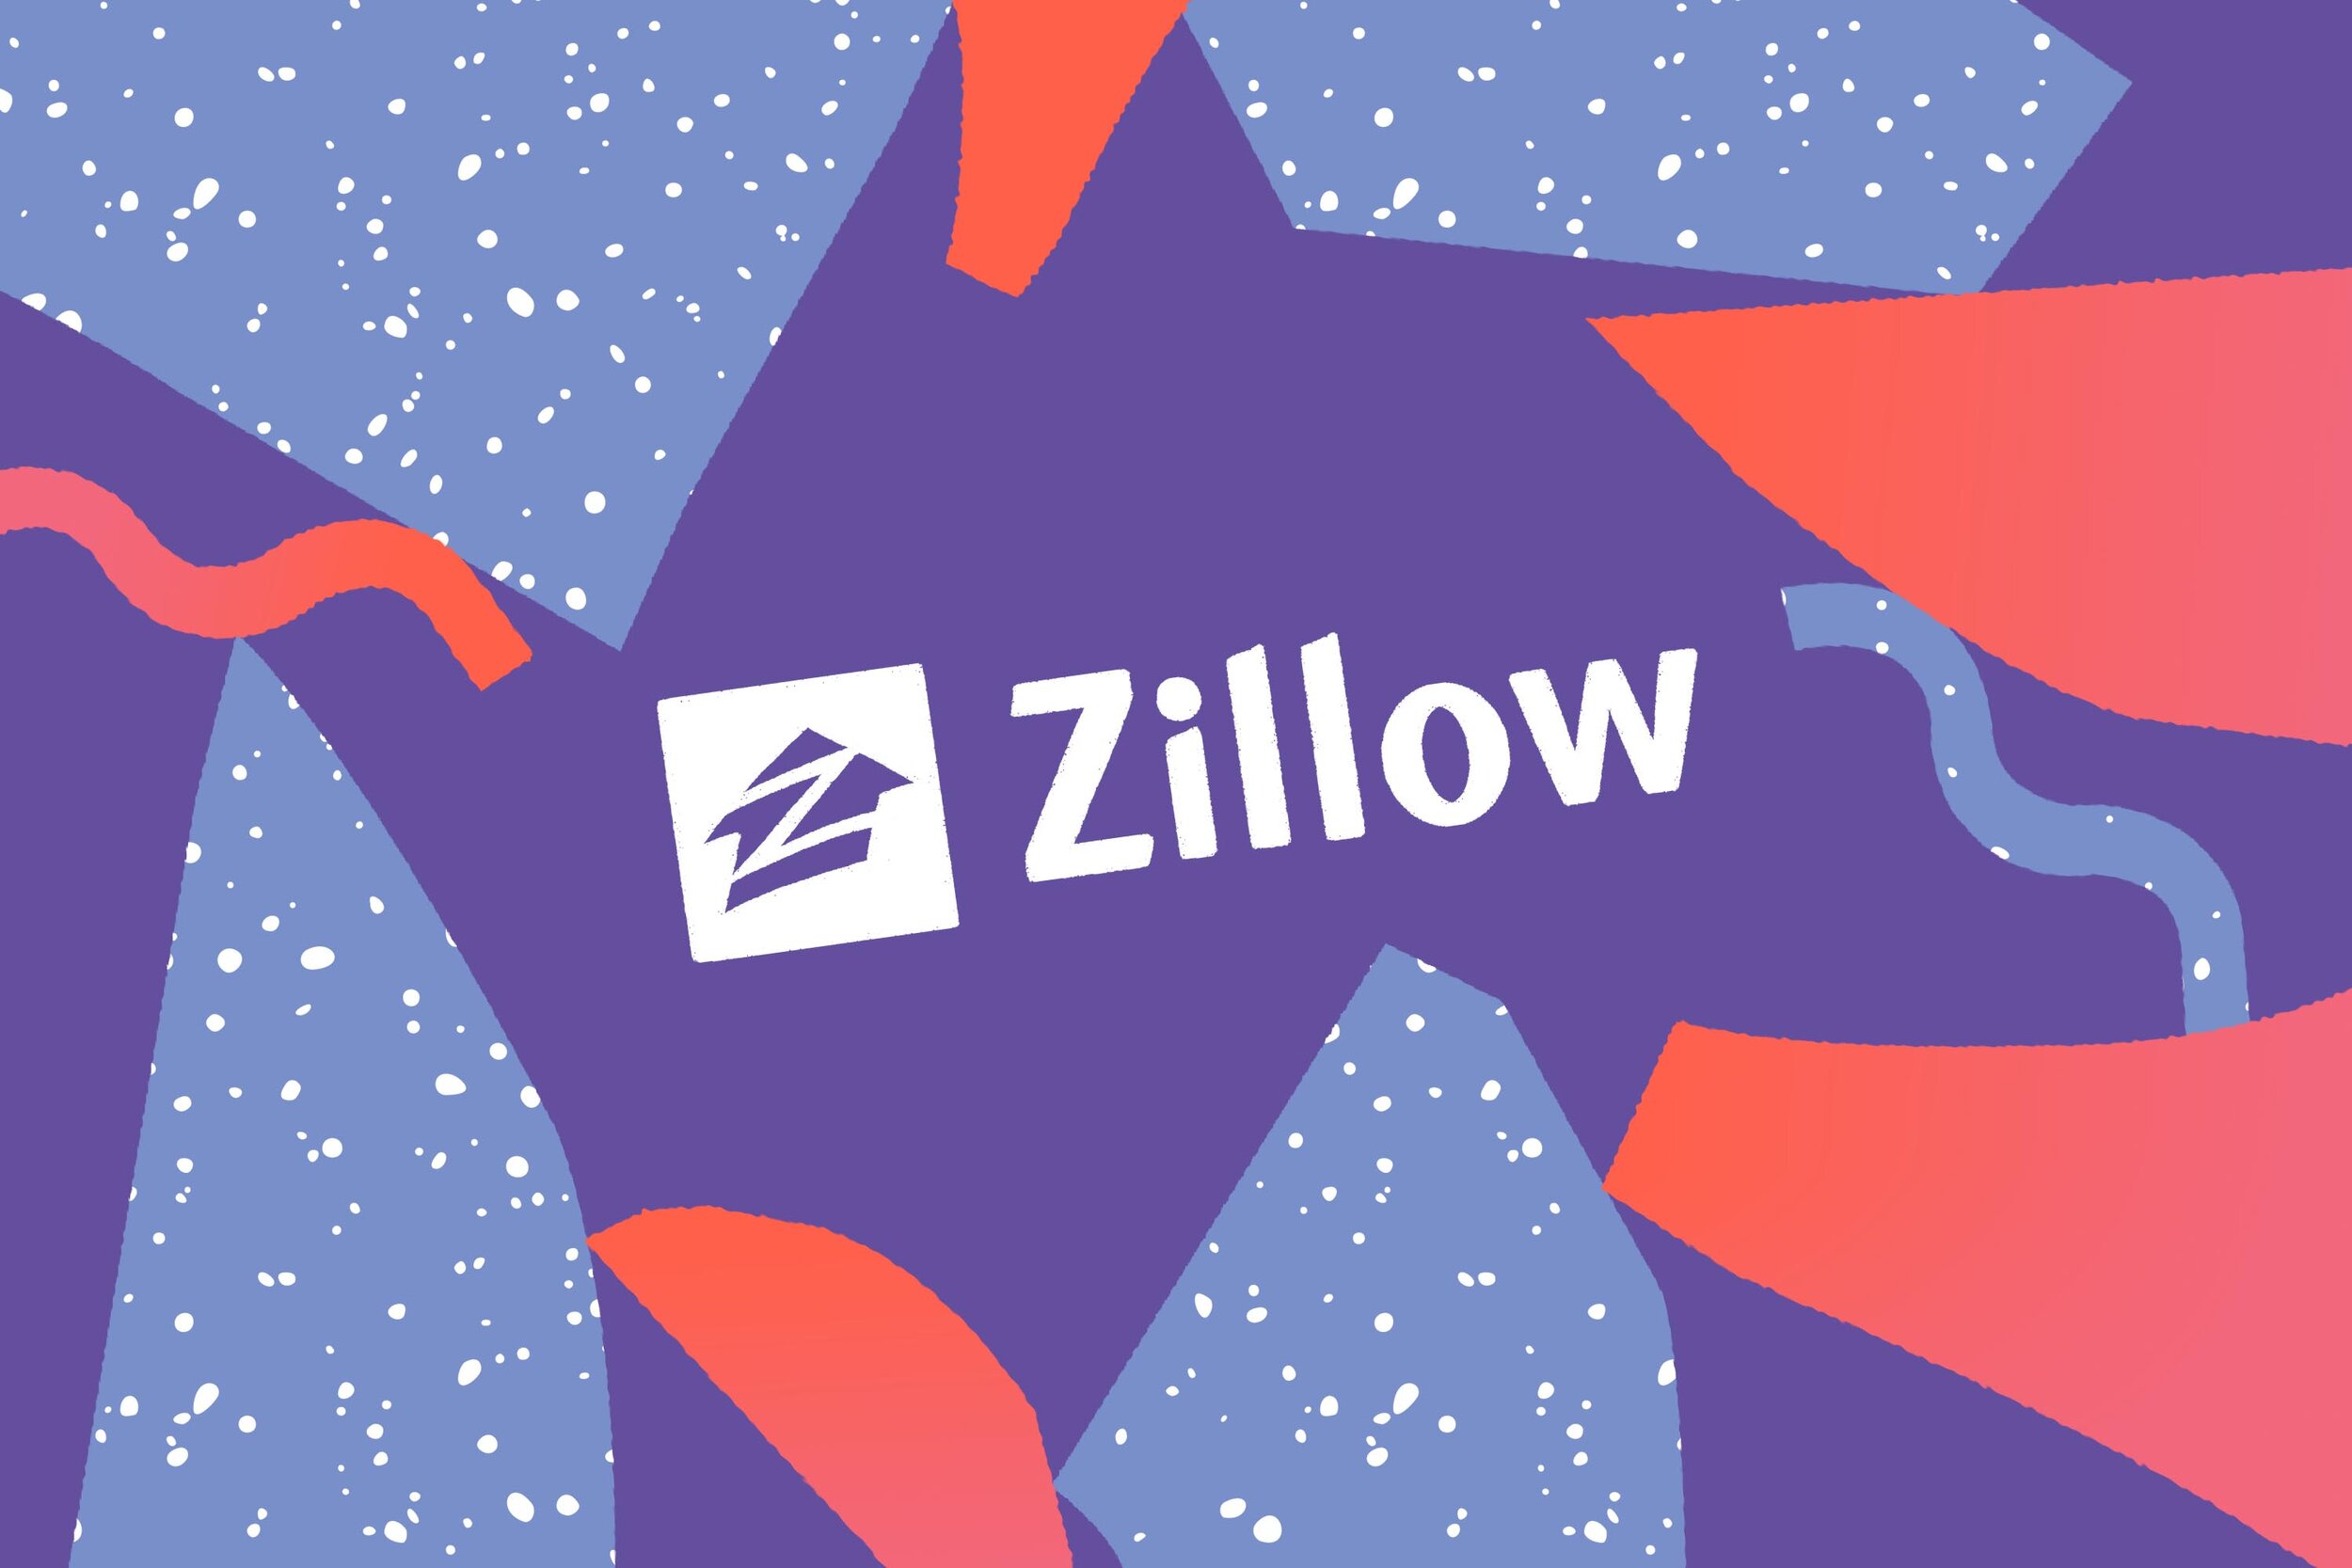 Zillow_Shapes.jpg